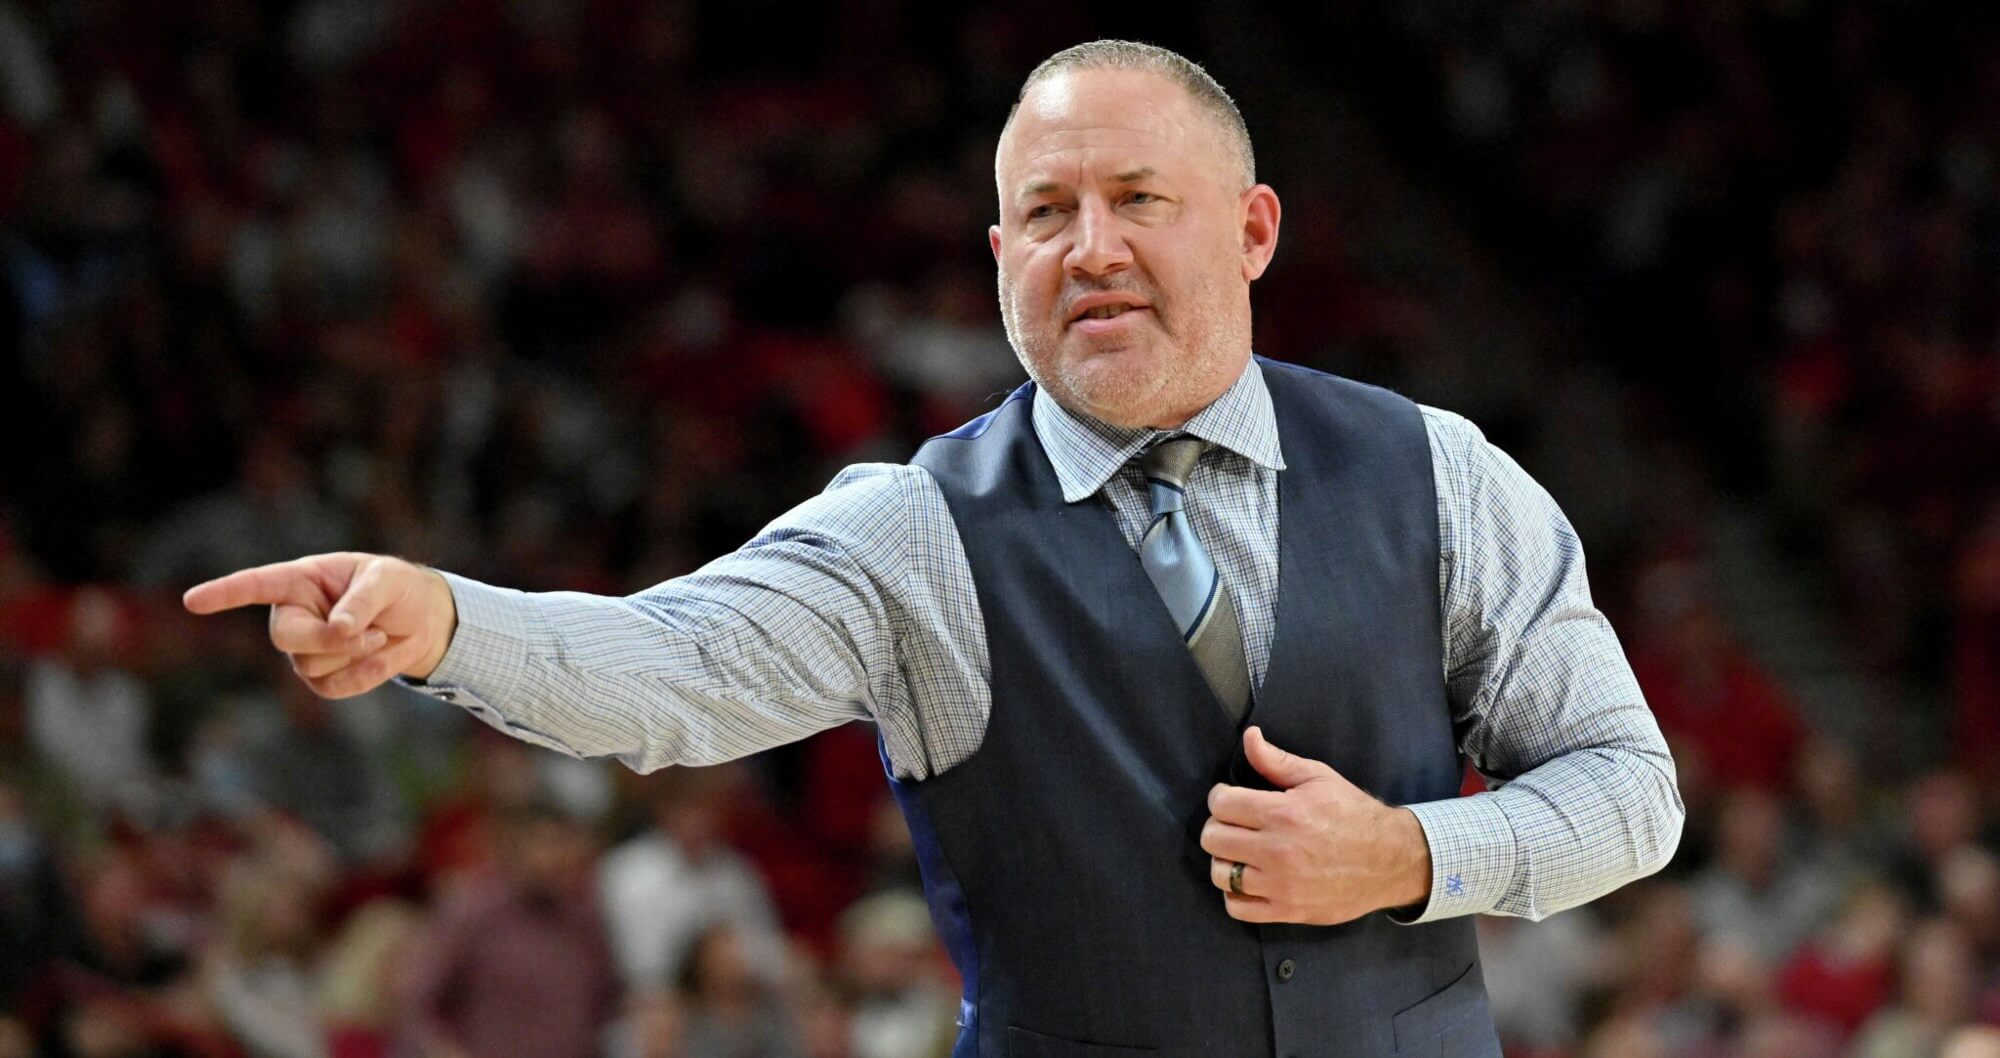 20-mind-blowing-facts-about-buzz-williams